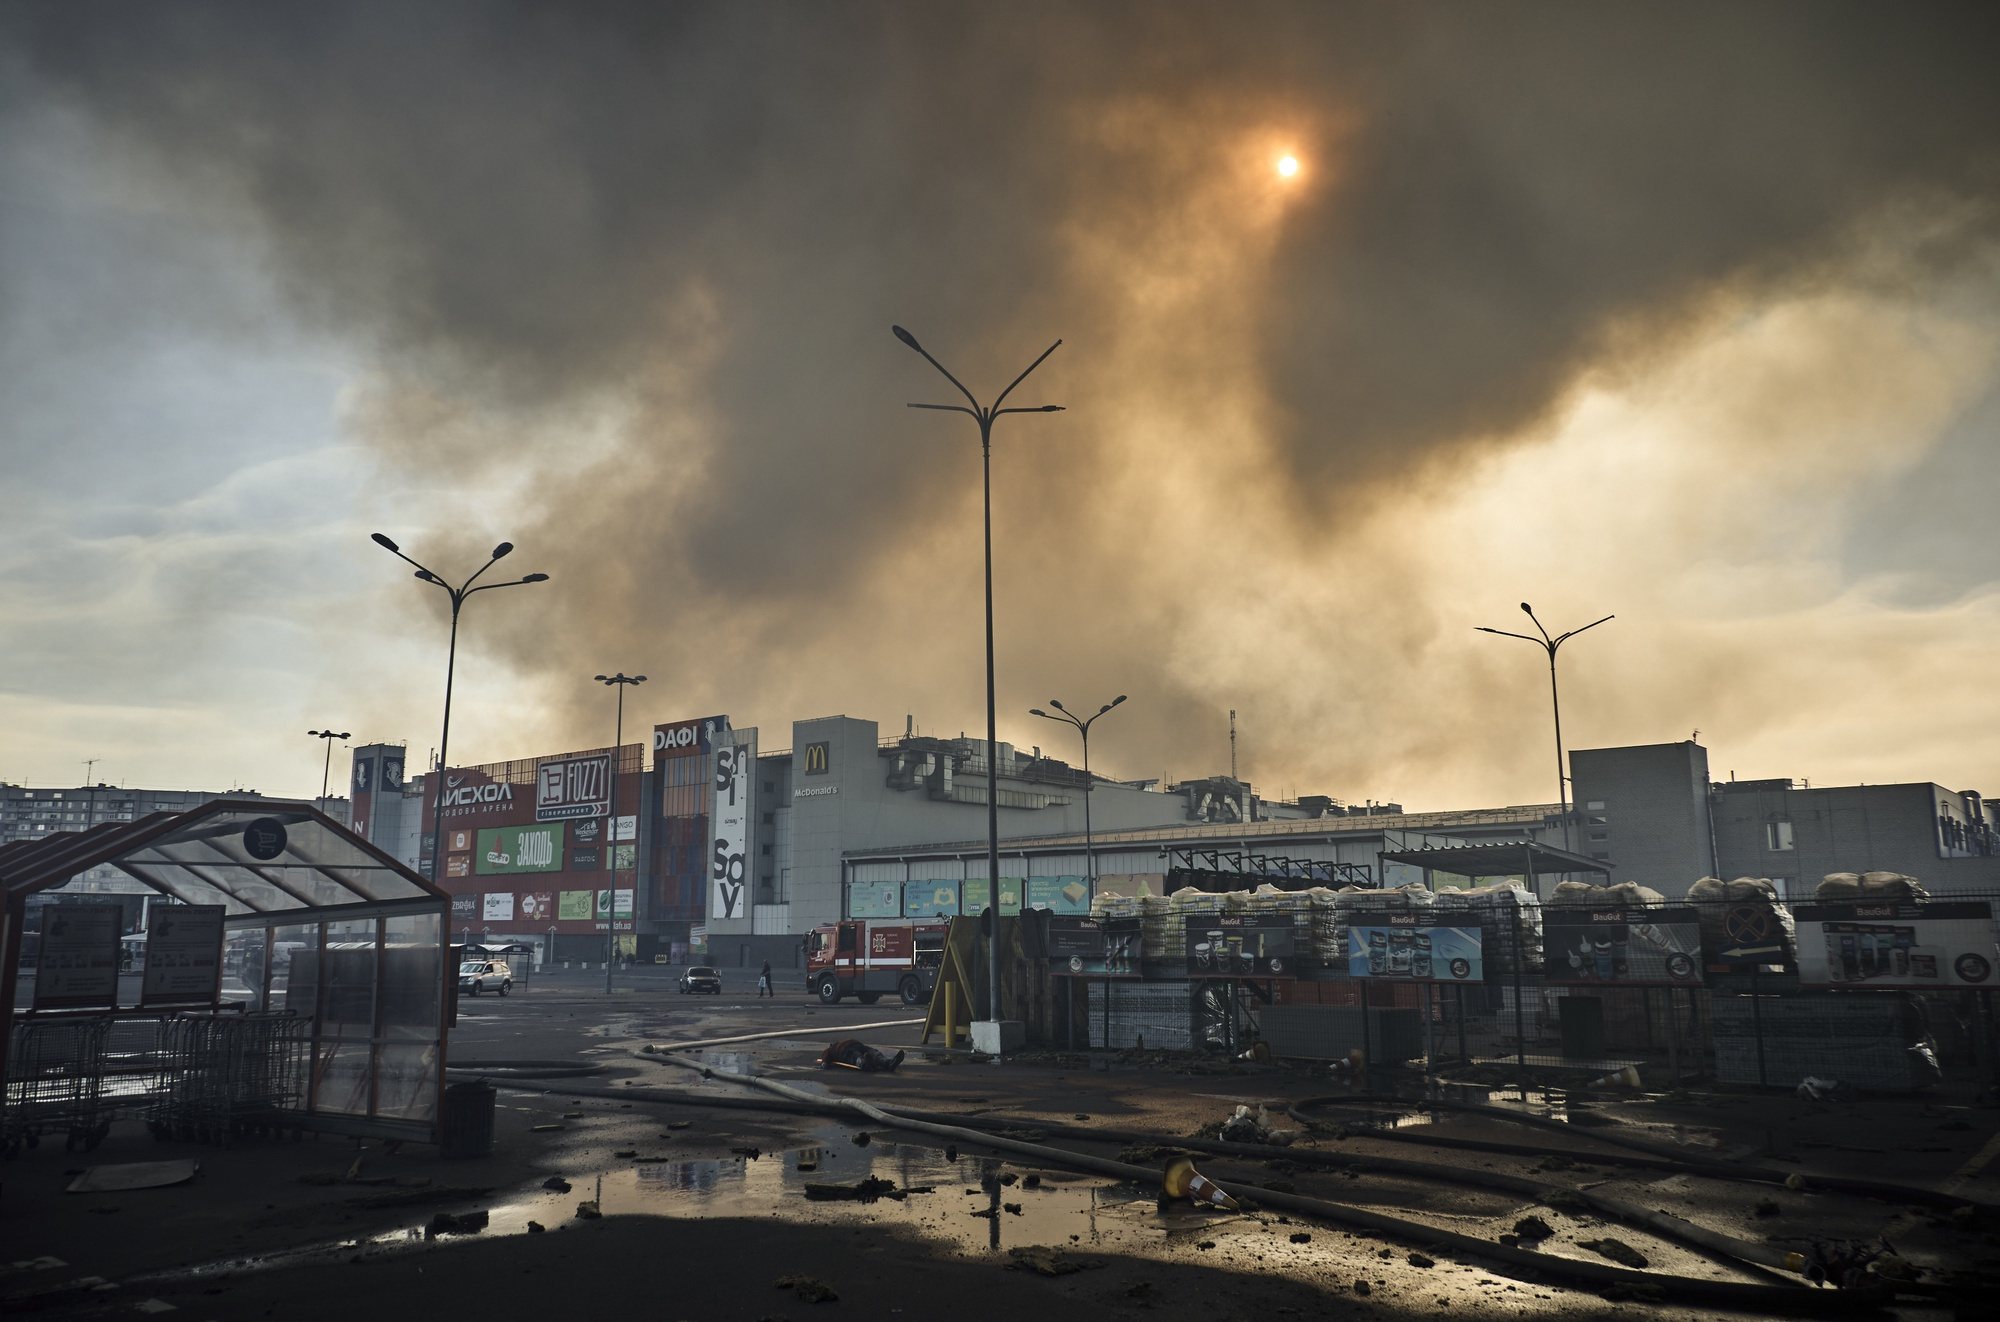 epa11369150 The general scene following the shelling of the hypermarket in Kharkiv, Ukraine, 25 May 2024 amid the Russian invasion. At least 2 people died and 33 were wounded in the glide-bombs attack according to the report of the head of the Kharkiv Military Administration Oleg Synegubov. Russian troops entered Ukrainian territory on 24 February 2022, starting a conflict that has provoked destruction and a humanitarian crisis.  EPA/SERGEY KOZLOV 53533